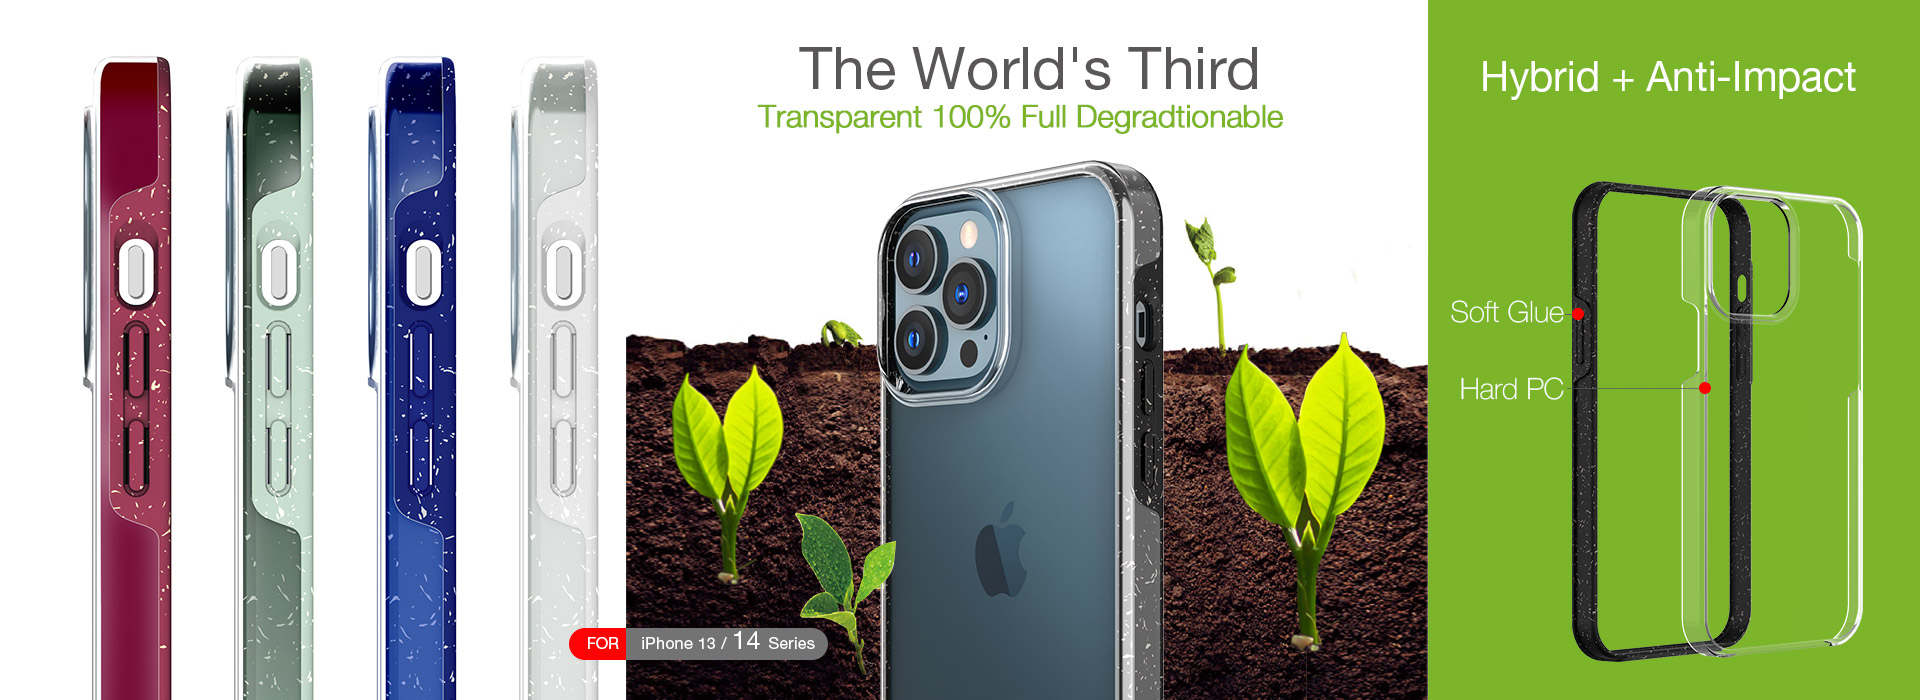 X-Fitted Transparent Hybrid 100% biodegradable and degradable iphone13 case